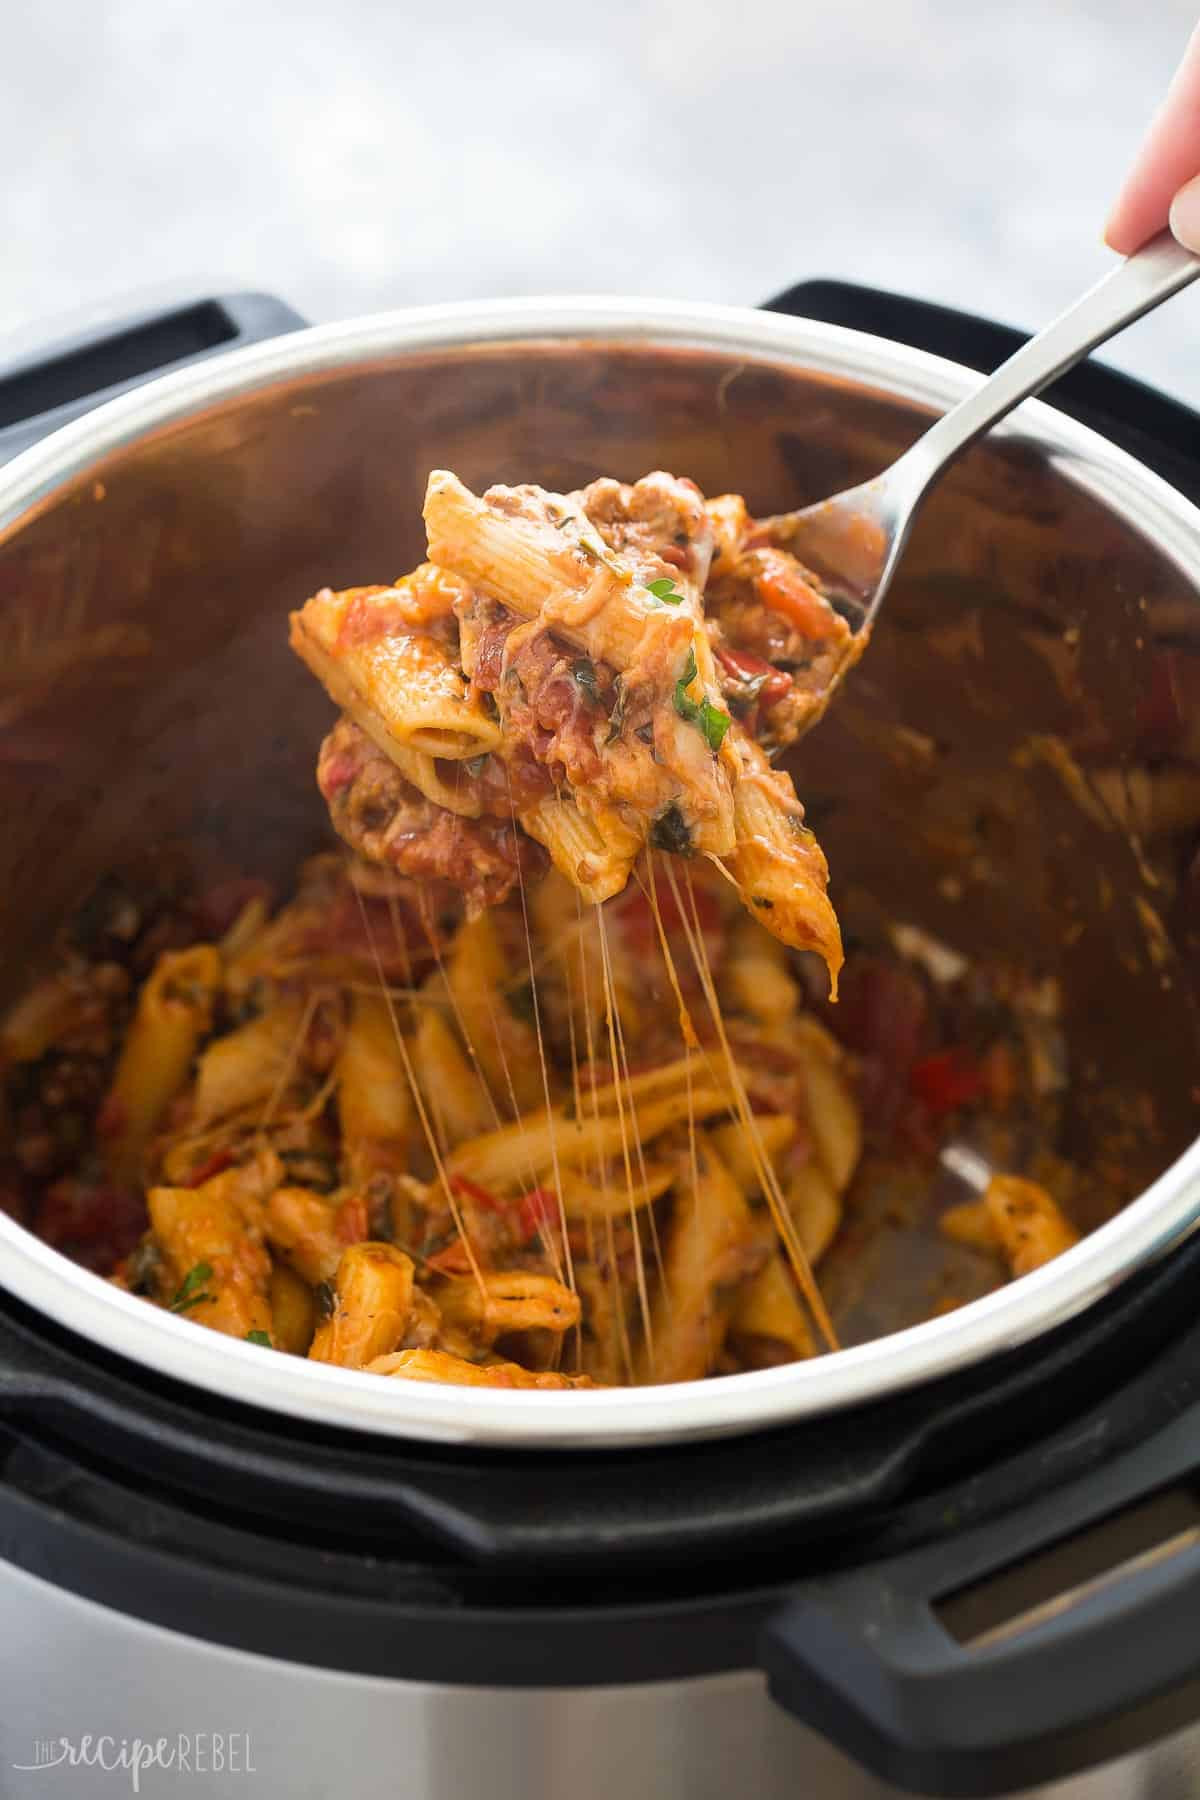 Recipes For The Instant Pot
 Easy Instant Pot Baked Ziti Recipe VIDEO pressure cooker